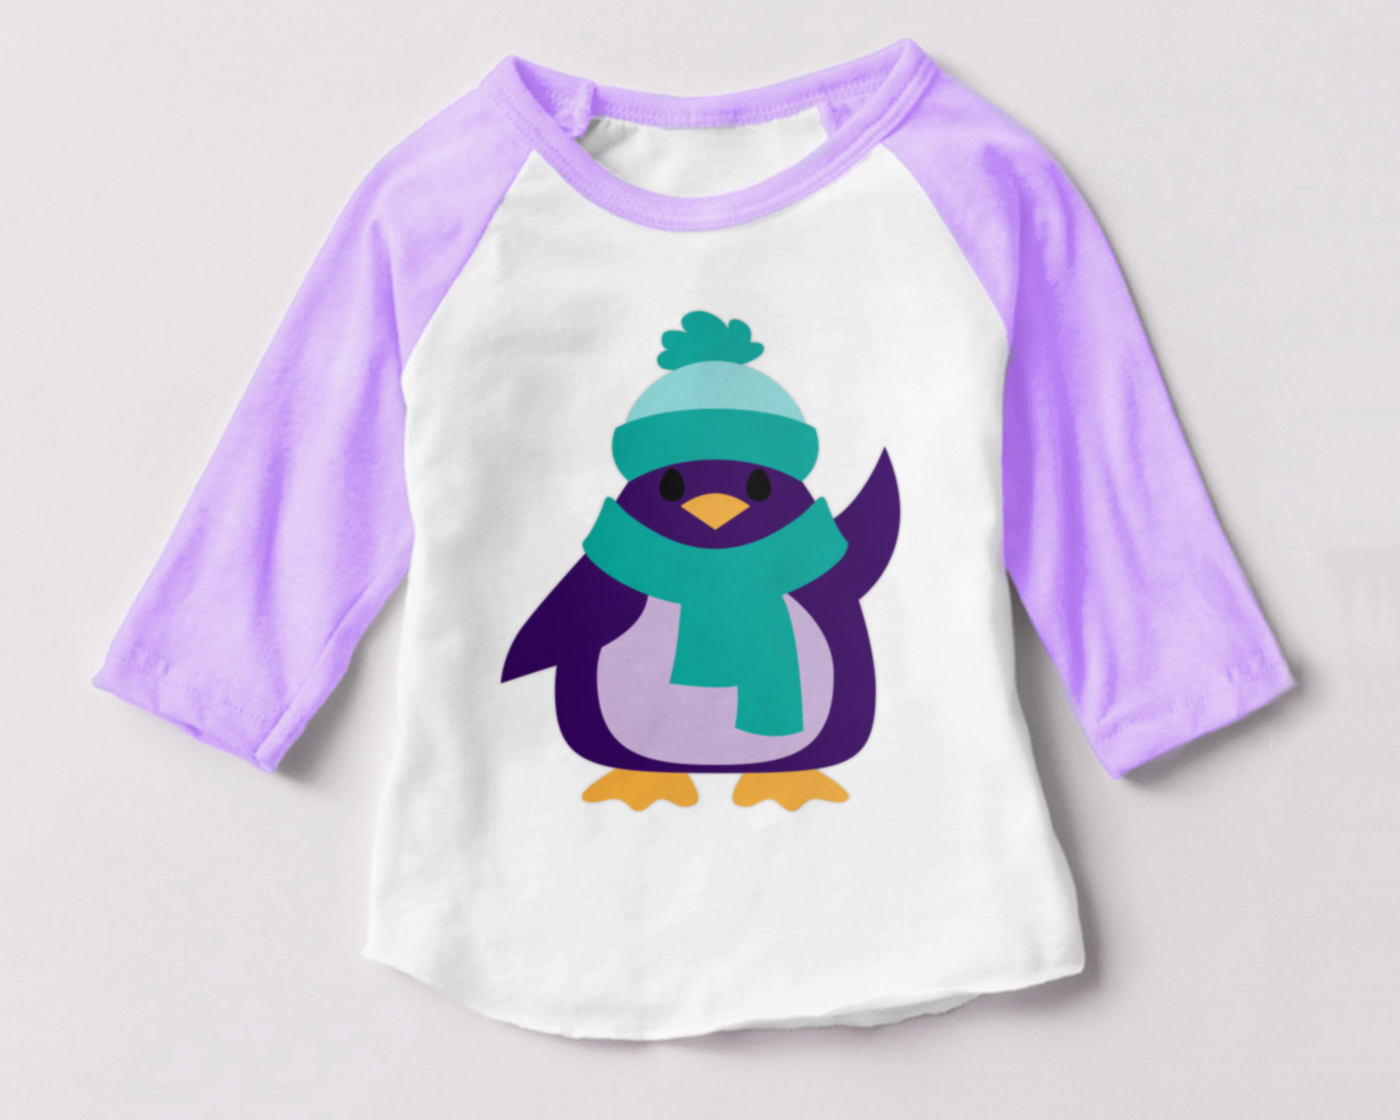 Waving penguin design wearing a hat and scarf